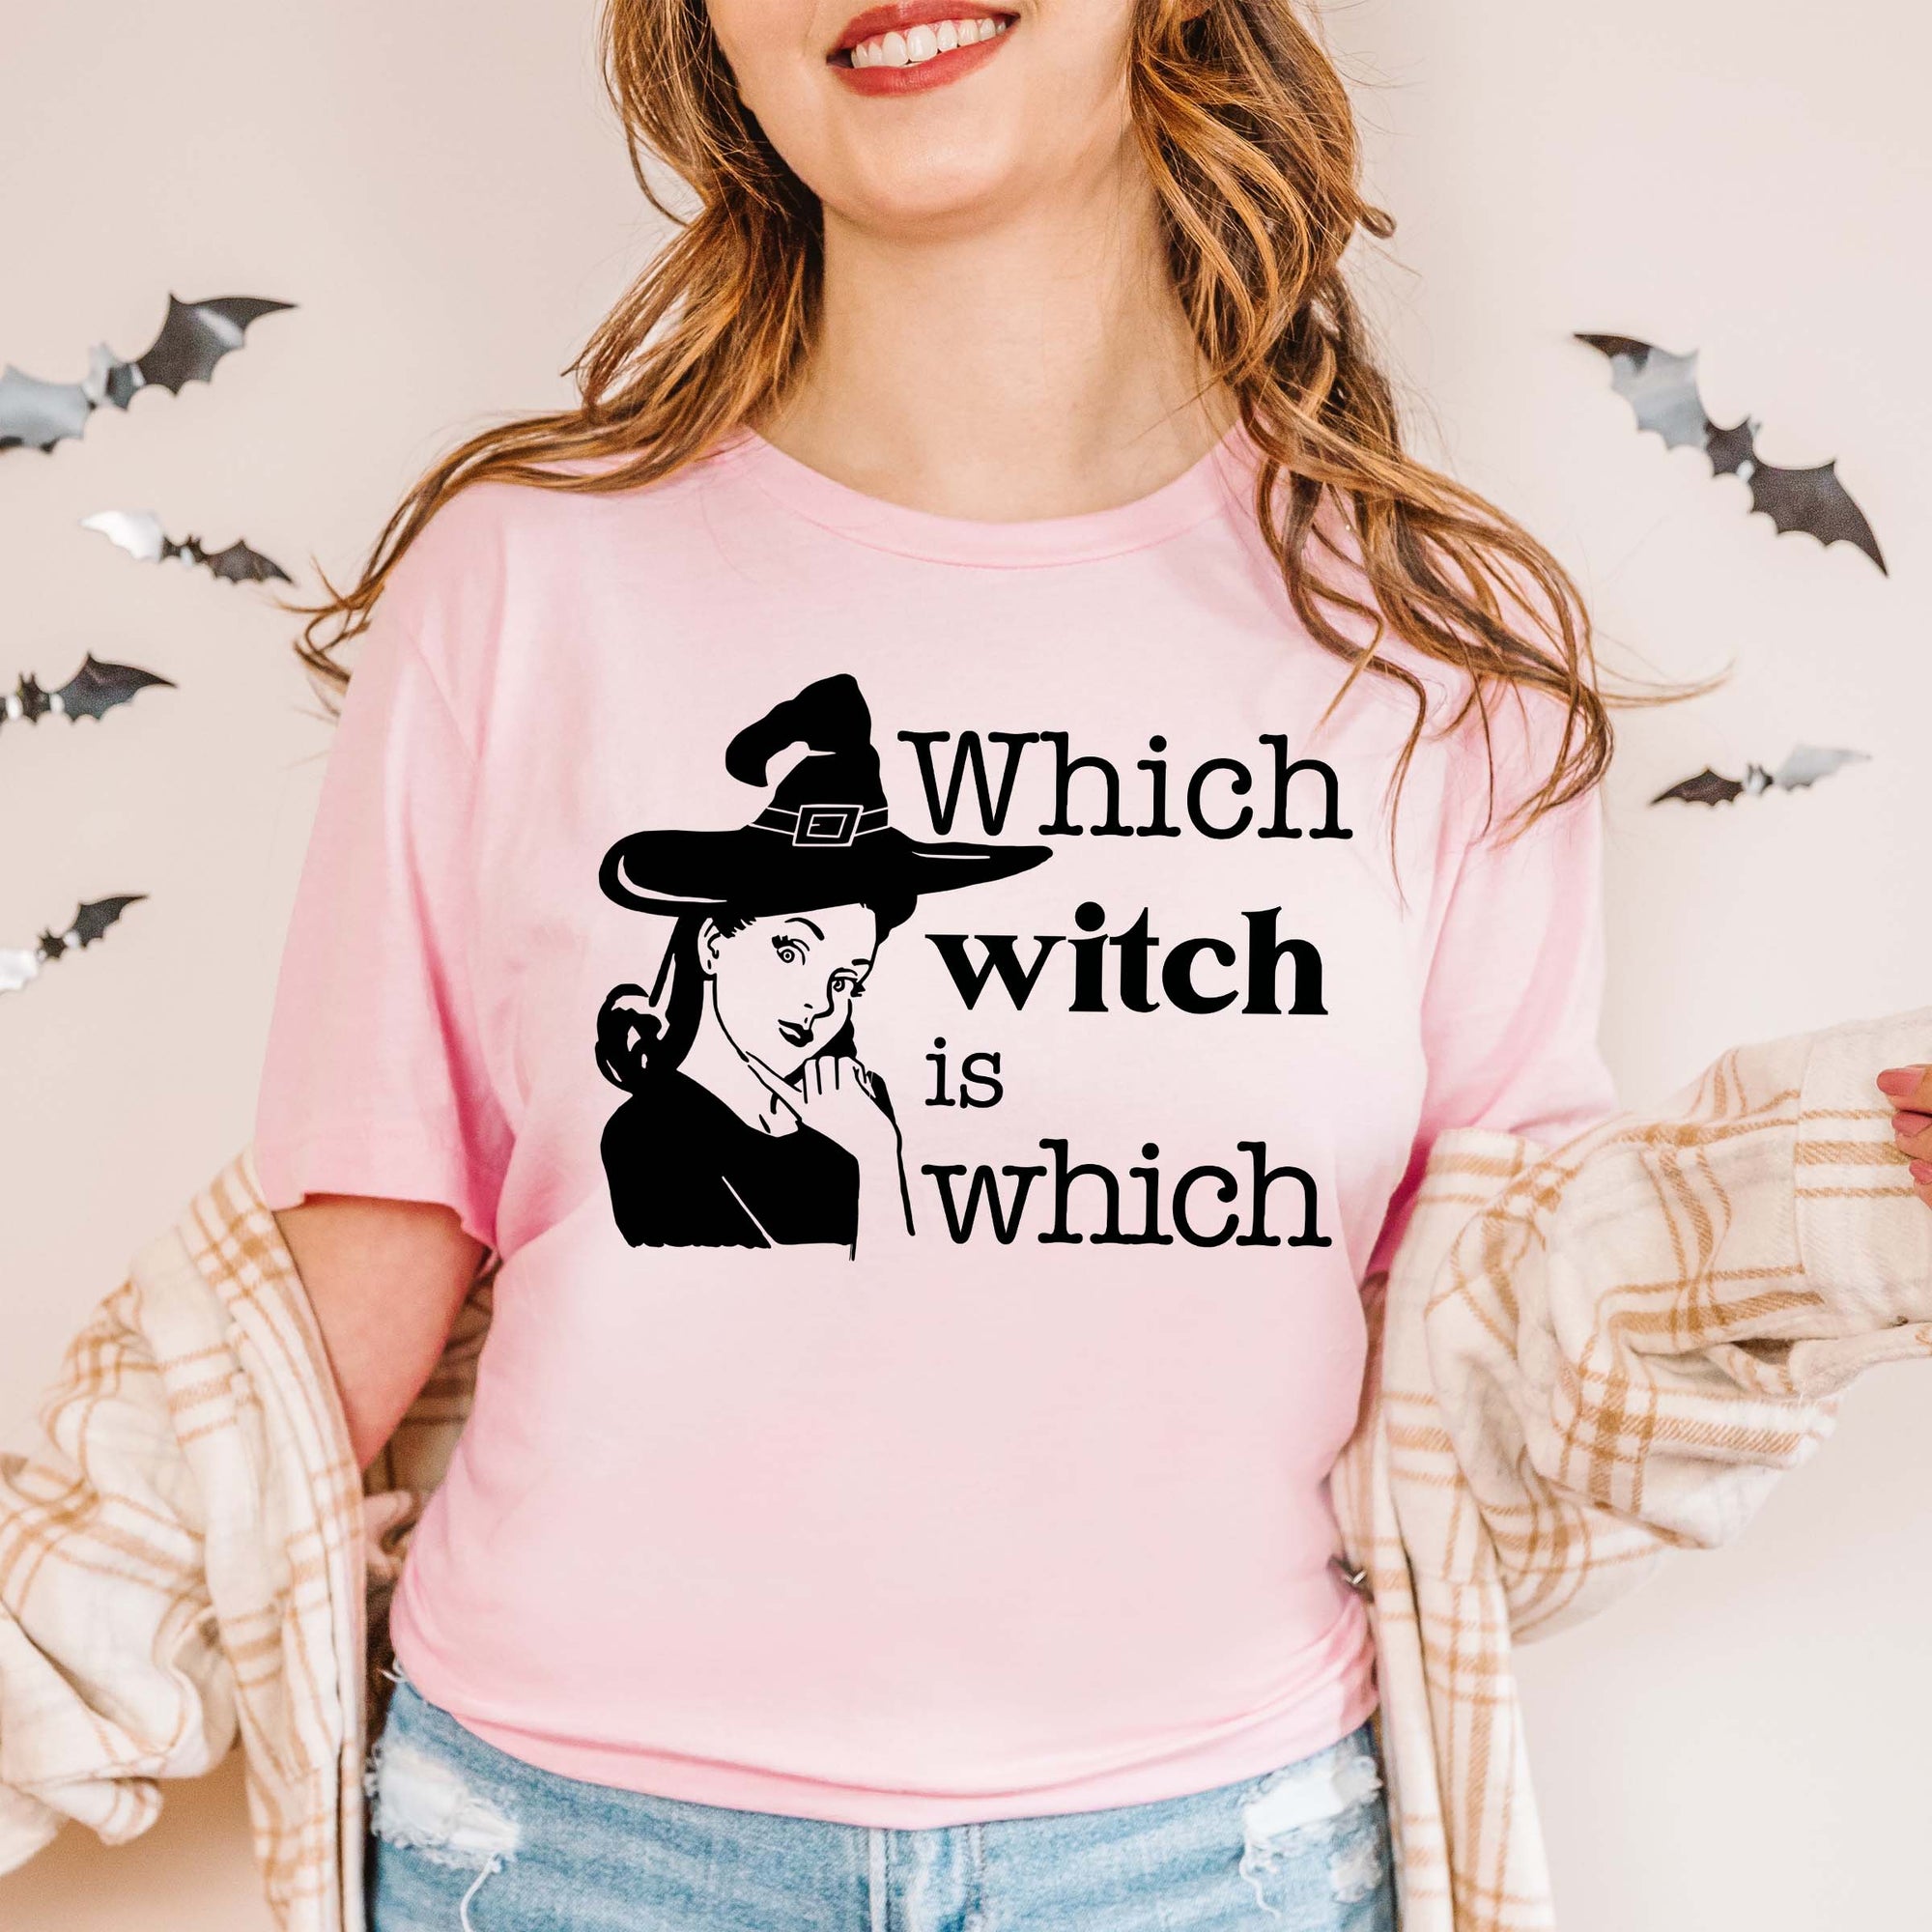 Which Witch is Which tee